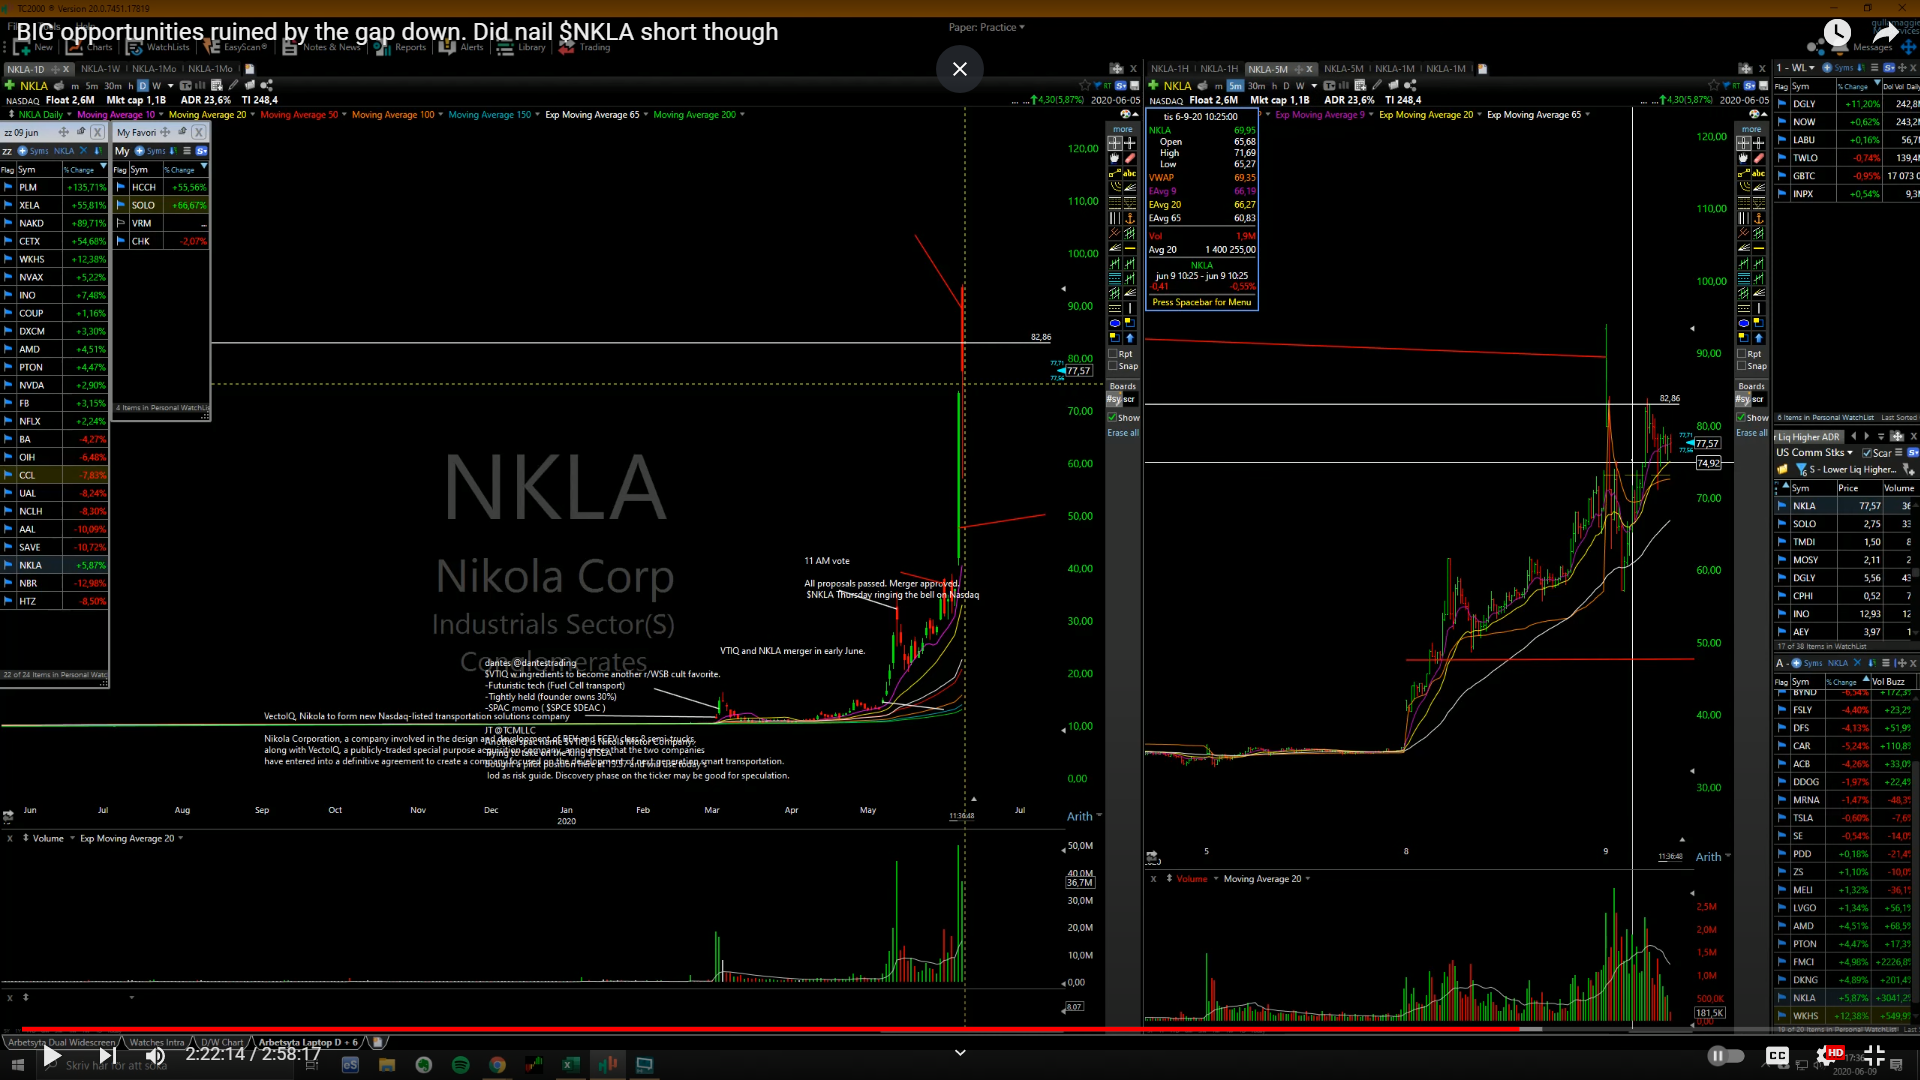 132 [BIG opportunities ruined by the gap down. Did nail $NKLA short though. Jun 9, 2020]